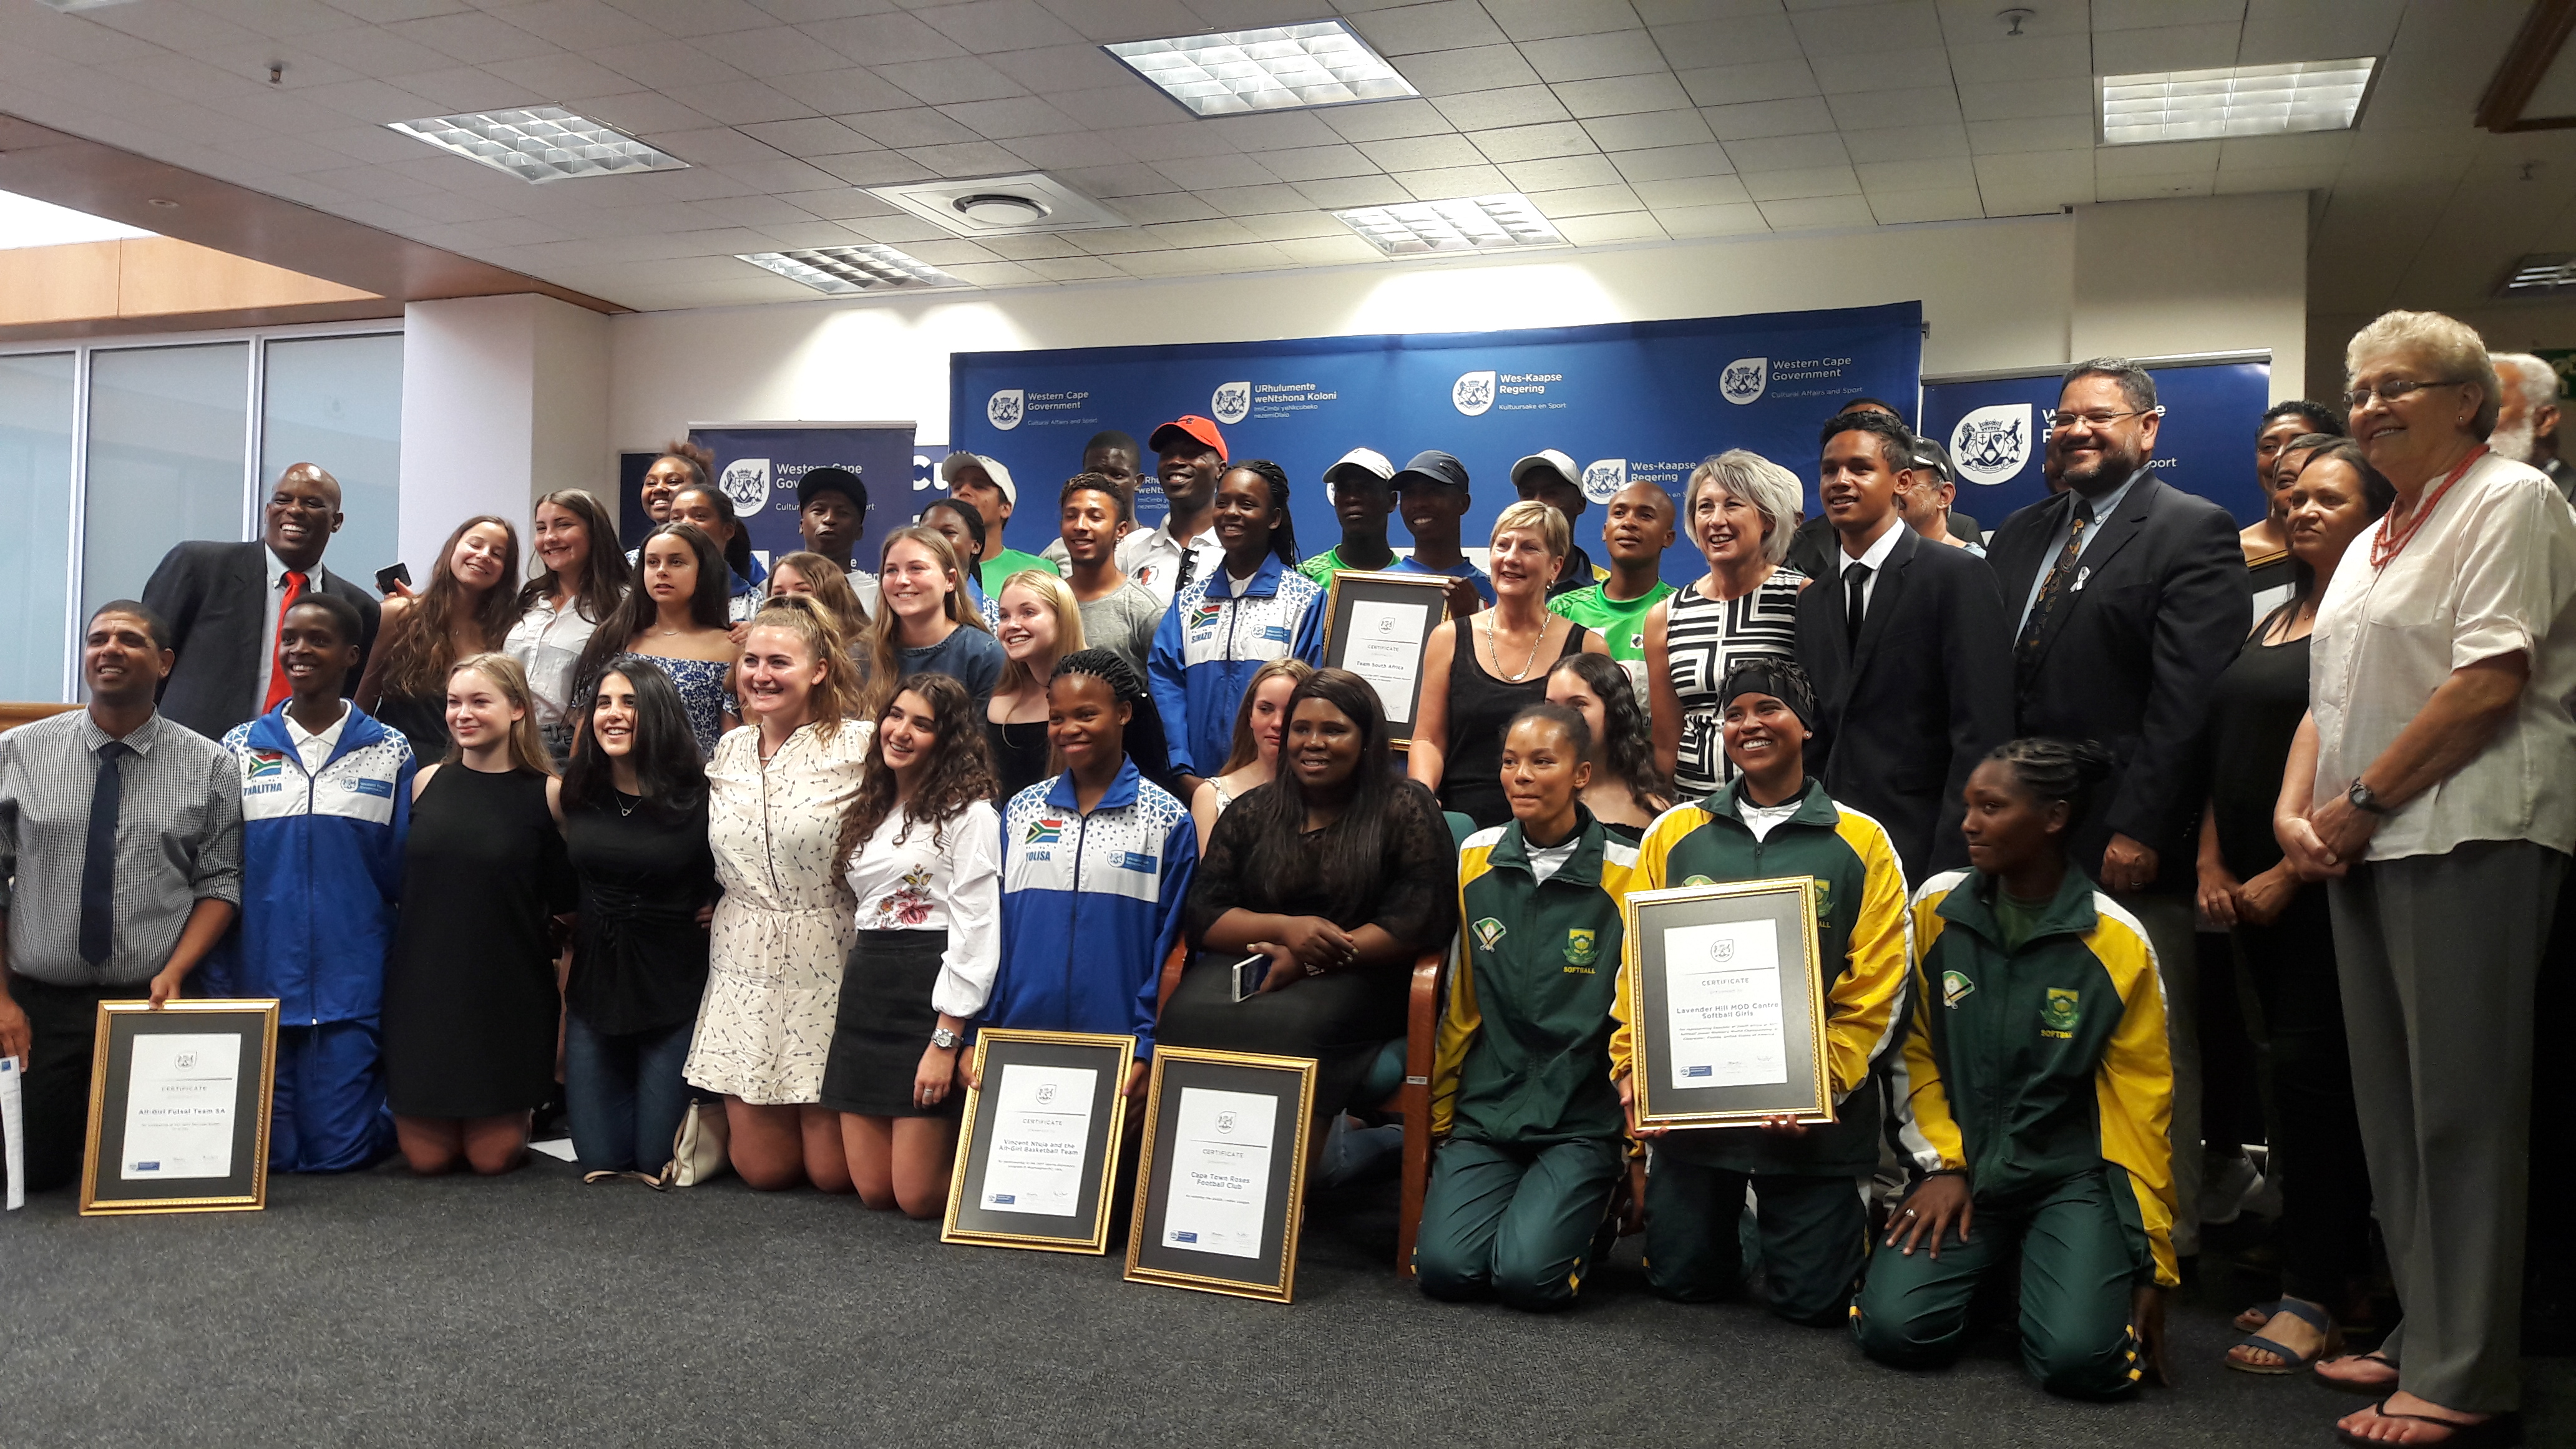 Minister Anroux Marais and the sportspeople who were honoured in Cape Town on 6 December 2017